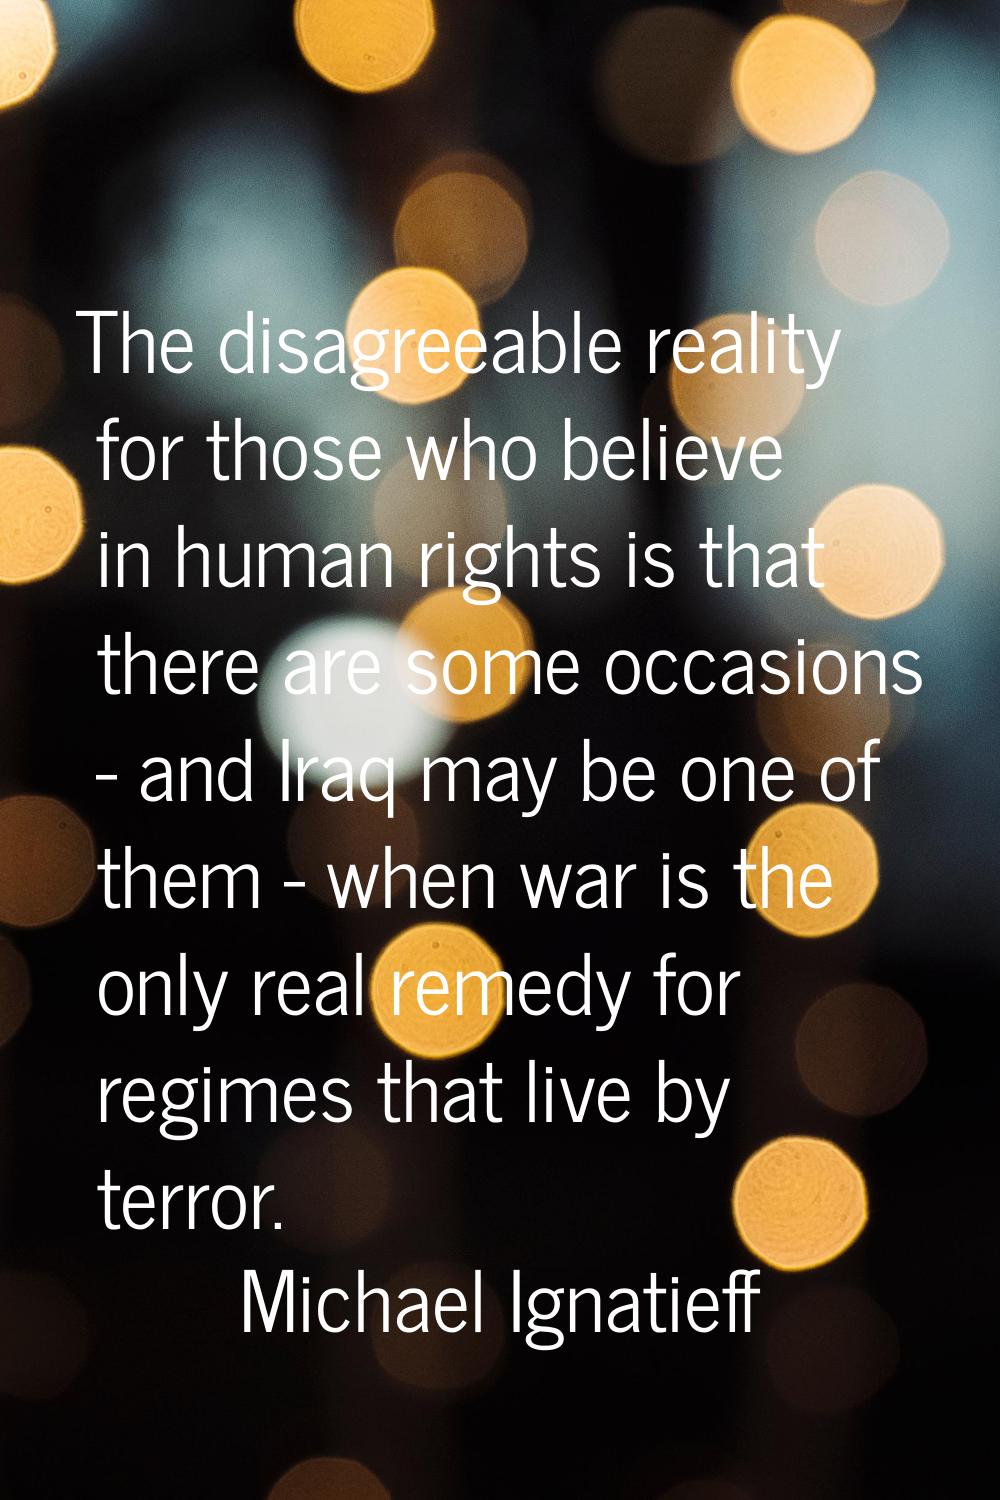 The disagreeable reality for those who believe in human rights is that there are some occasions - a